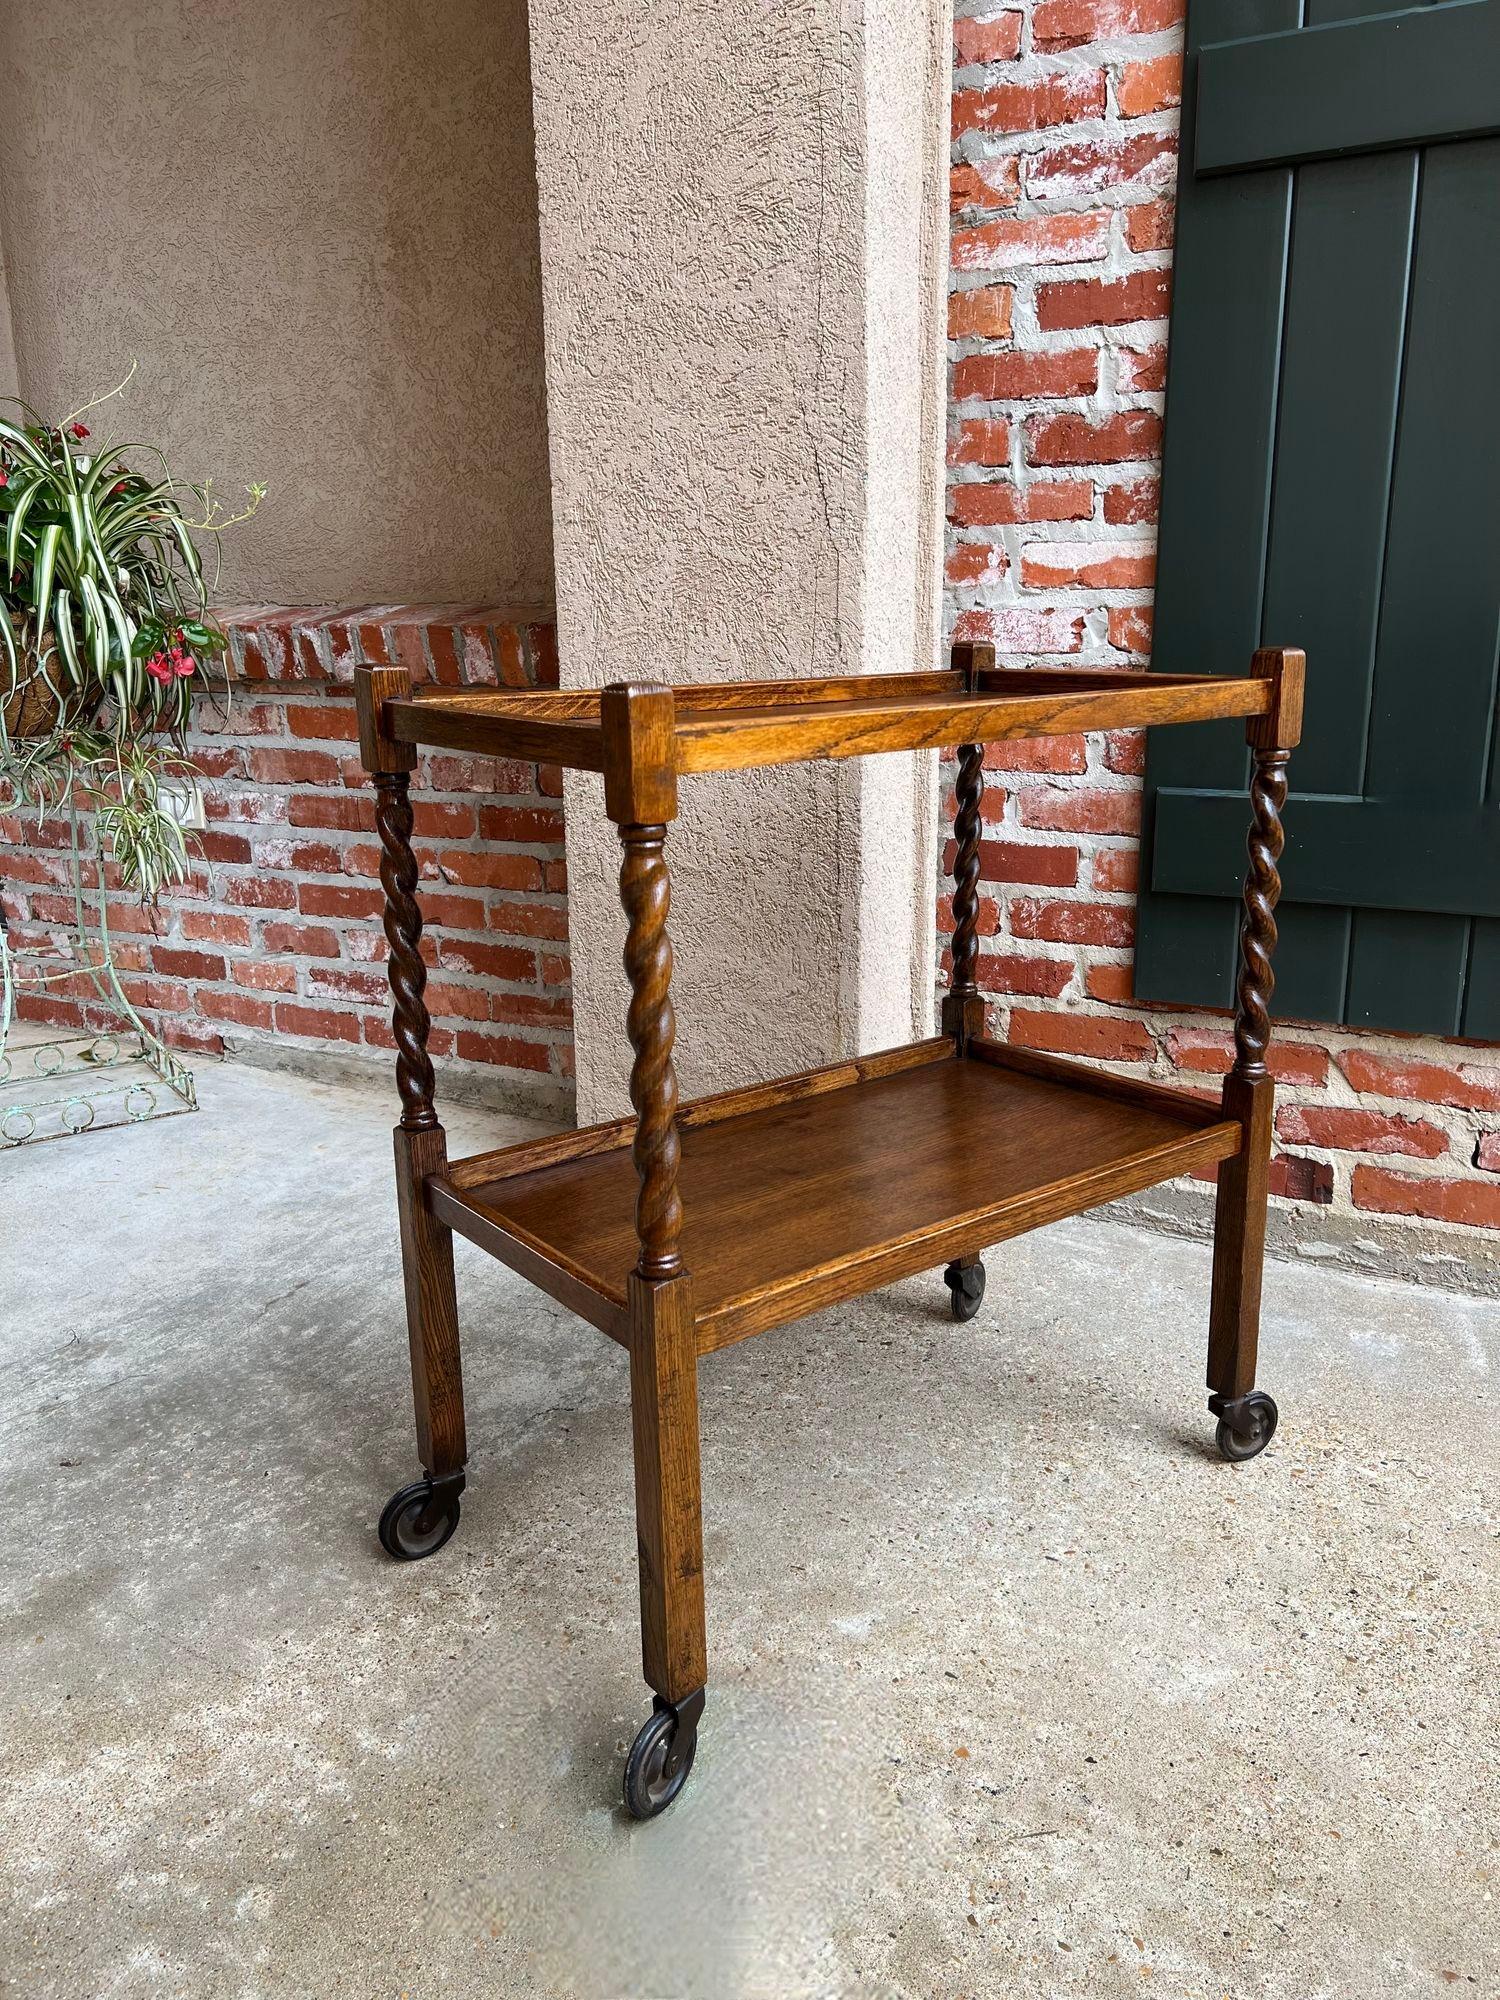 Antique English tea trolley drinks cart tiger Oak Barley twist cocktail table.

 Direct from England, a beautiful antique English oak tea trolley or “dumbwaiter” drinks serving cart. Excellent for entertaining, as a drinks or dessert cart, and